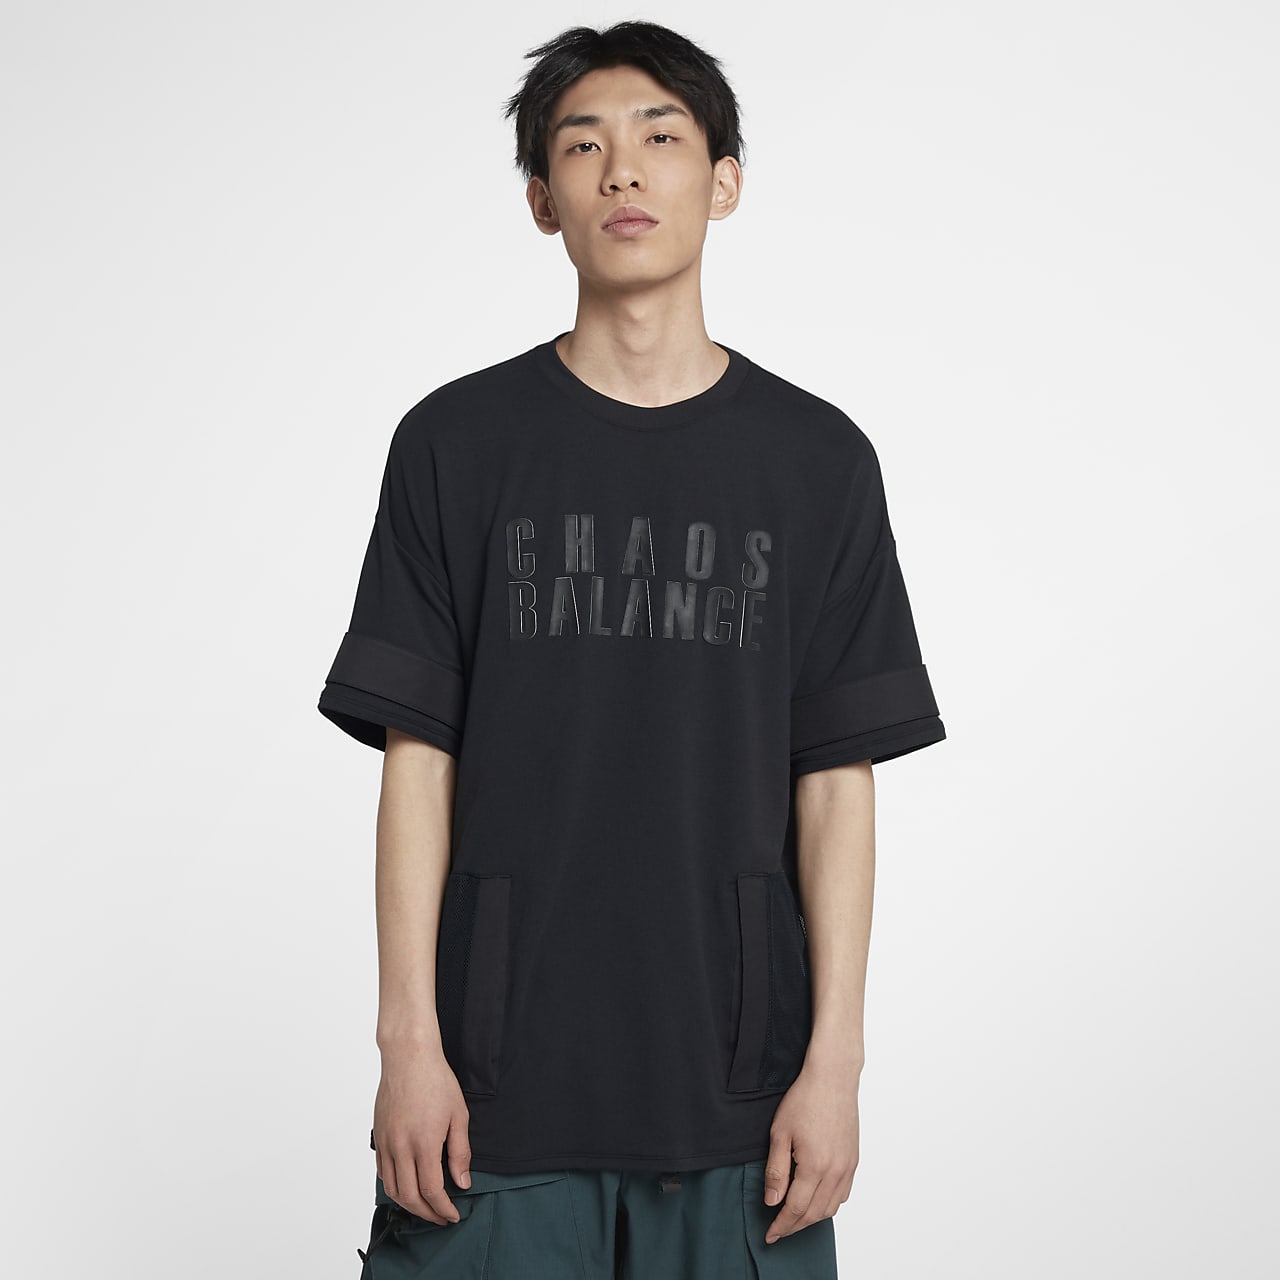 nike undercover Zn 1 T-shirts